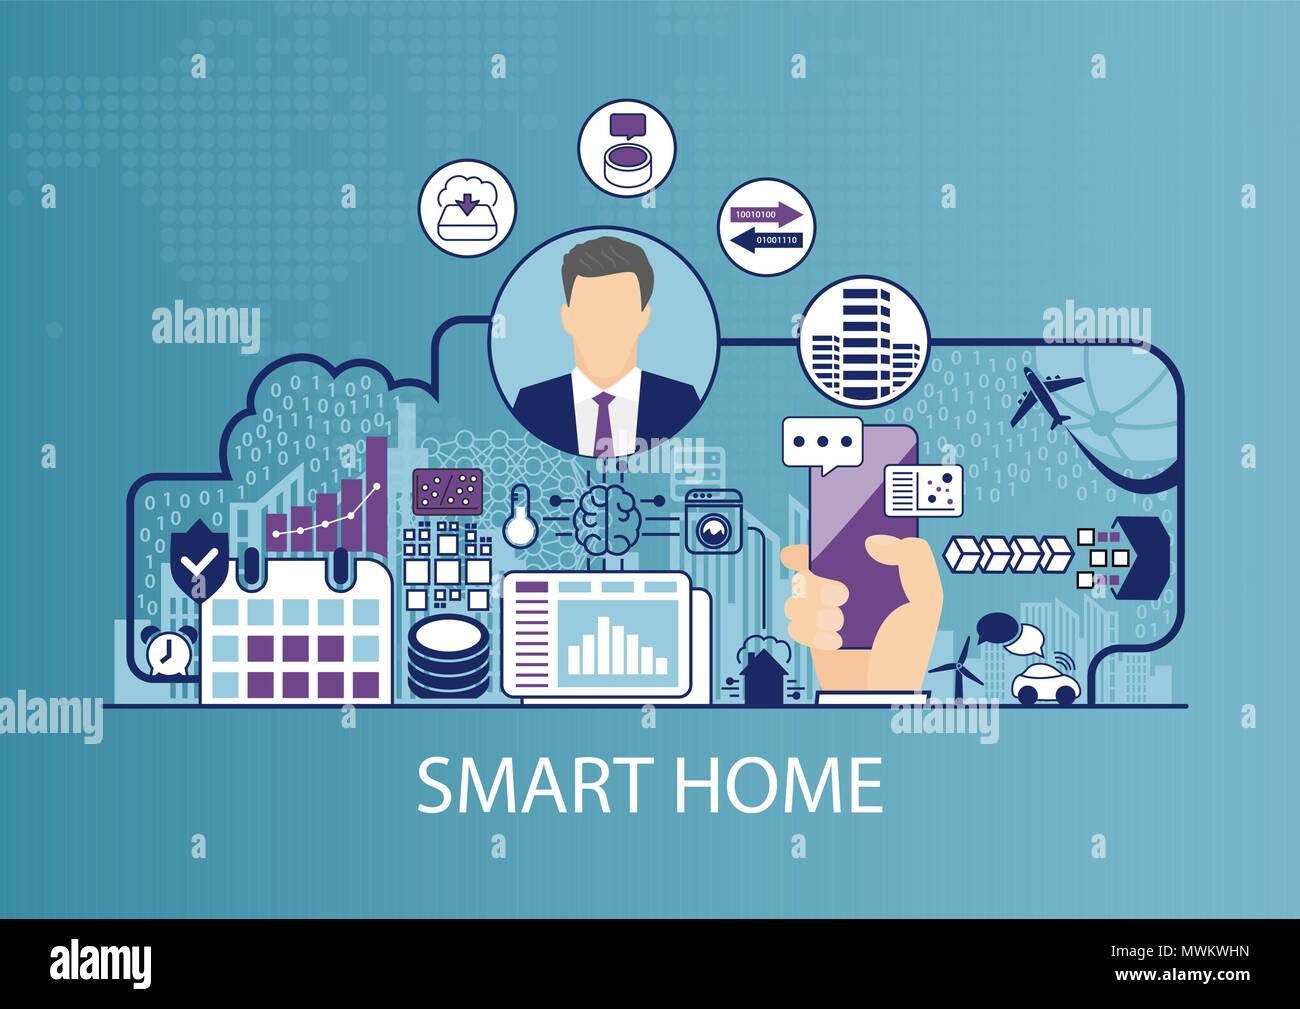 Smart home automation vector illustration with business man and icons. Stock Vector